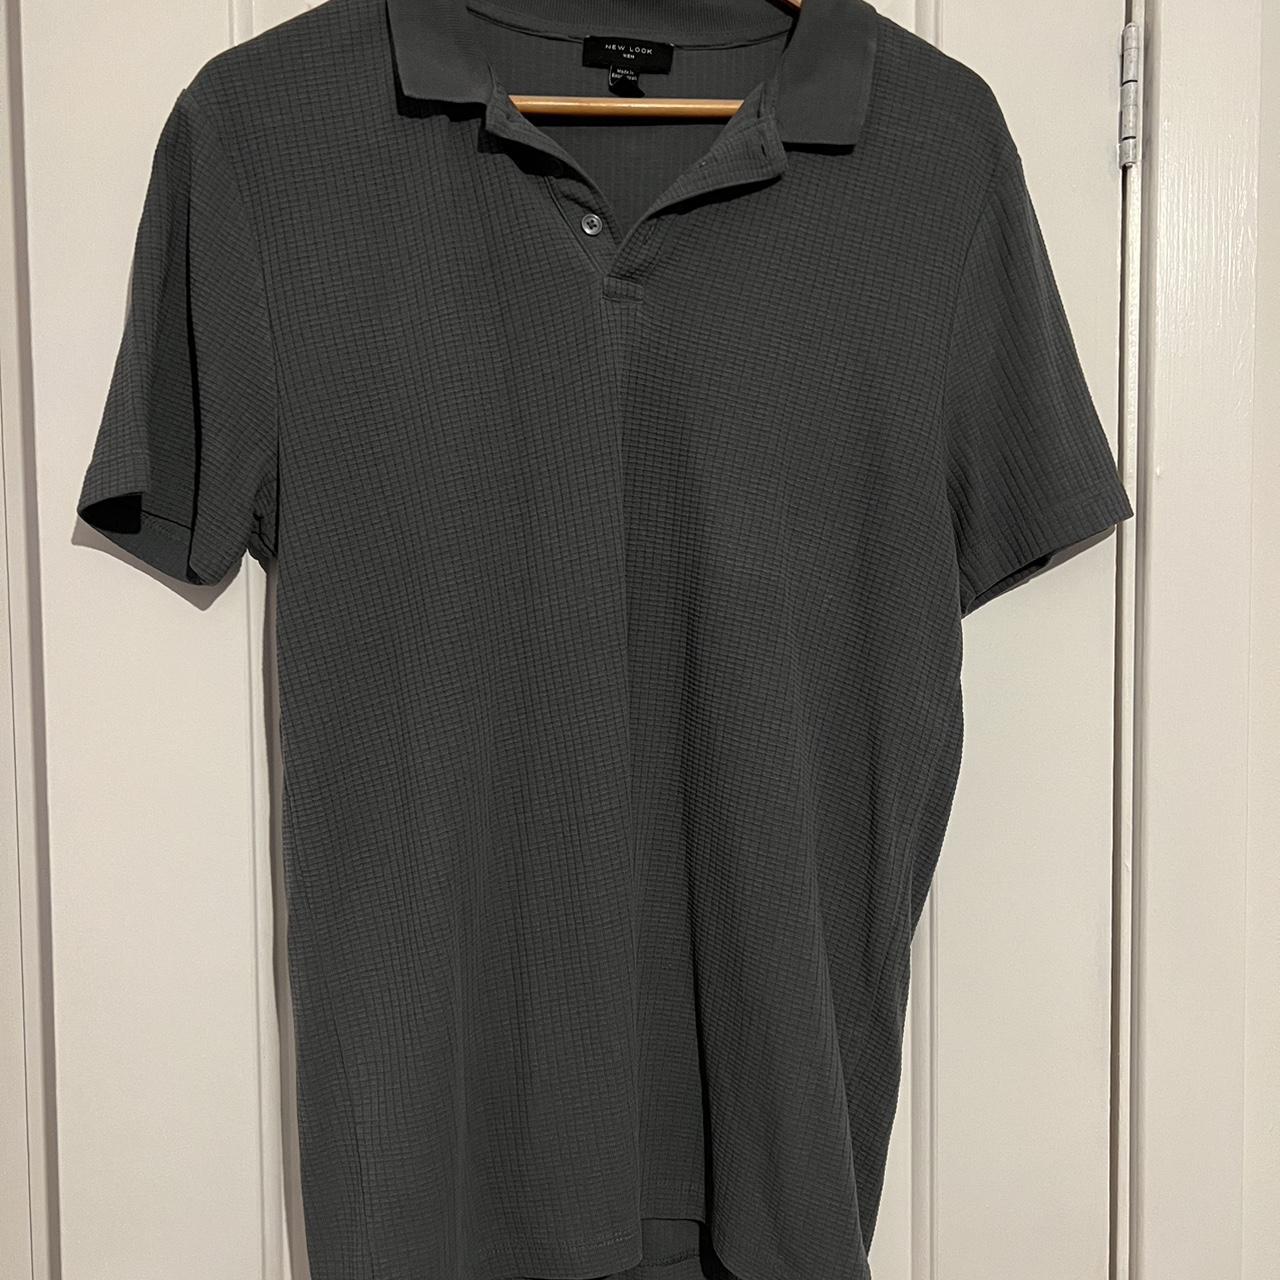 New Look Men's Grey and Blue Polo-shirts | Depop